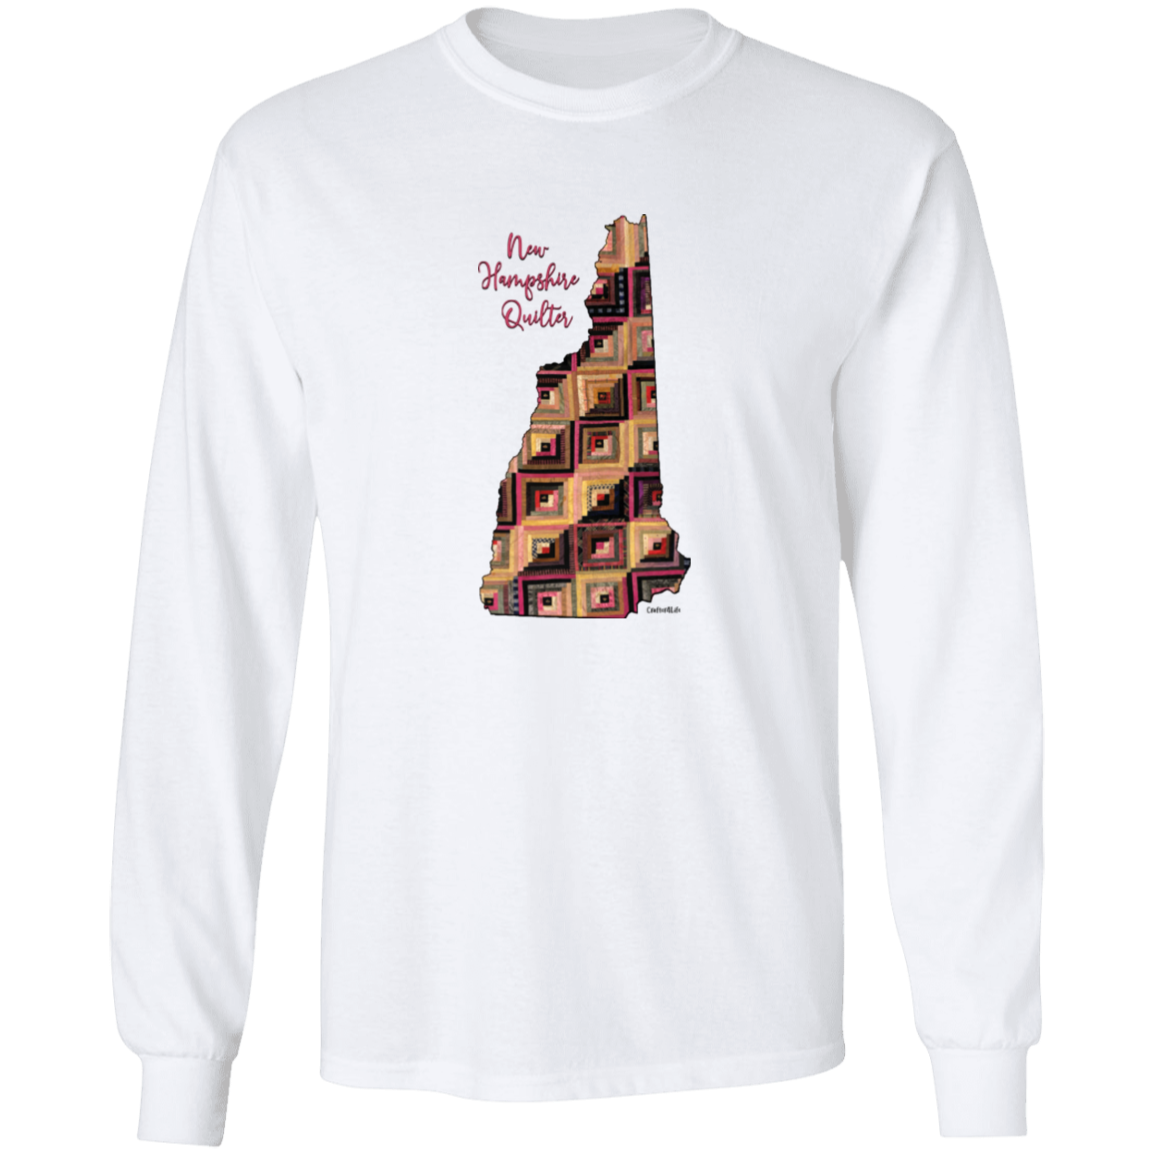 New Hampshire Quilter Long Sleeve T-Shirt, Gift for Quilting Friends and Family